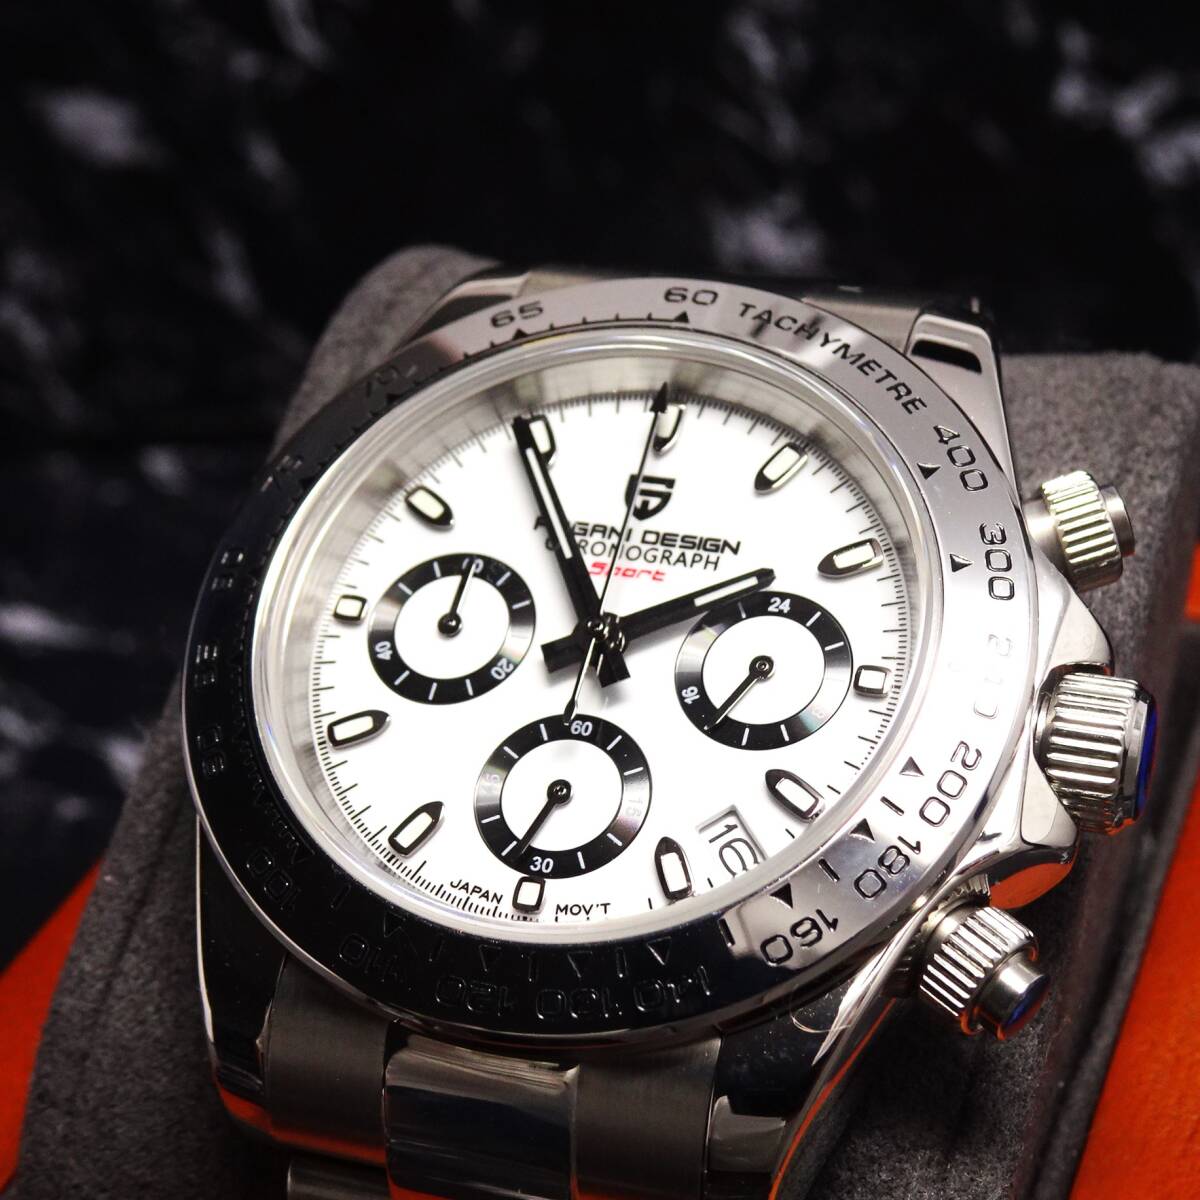  free shipping * new goods * Pagani design * men's * Seiko made VK63 chronograph sport * quarts type wristwatch *oma-ju watch * made of stainless steel 